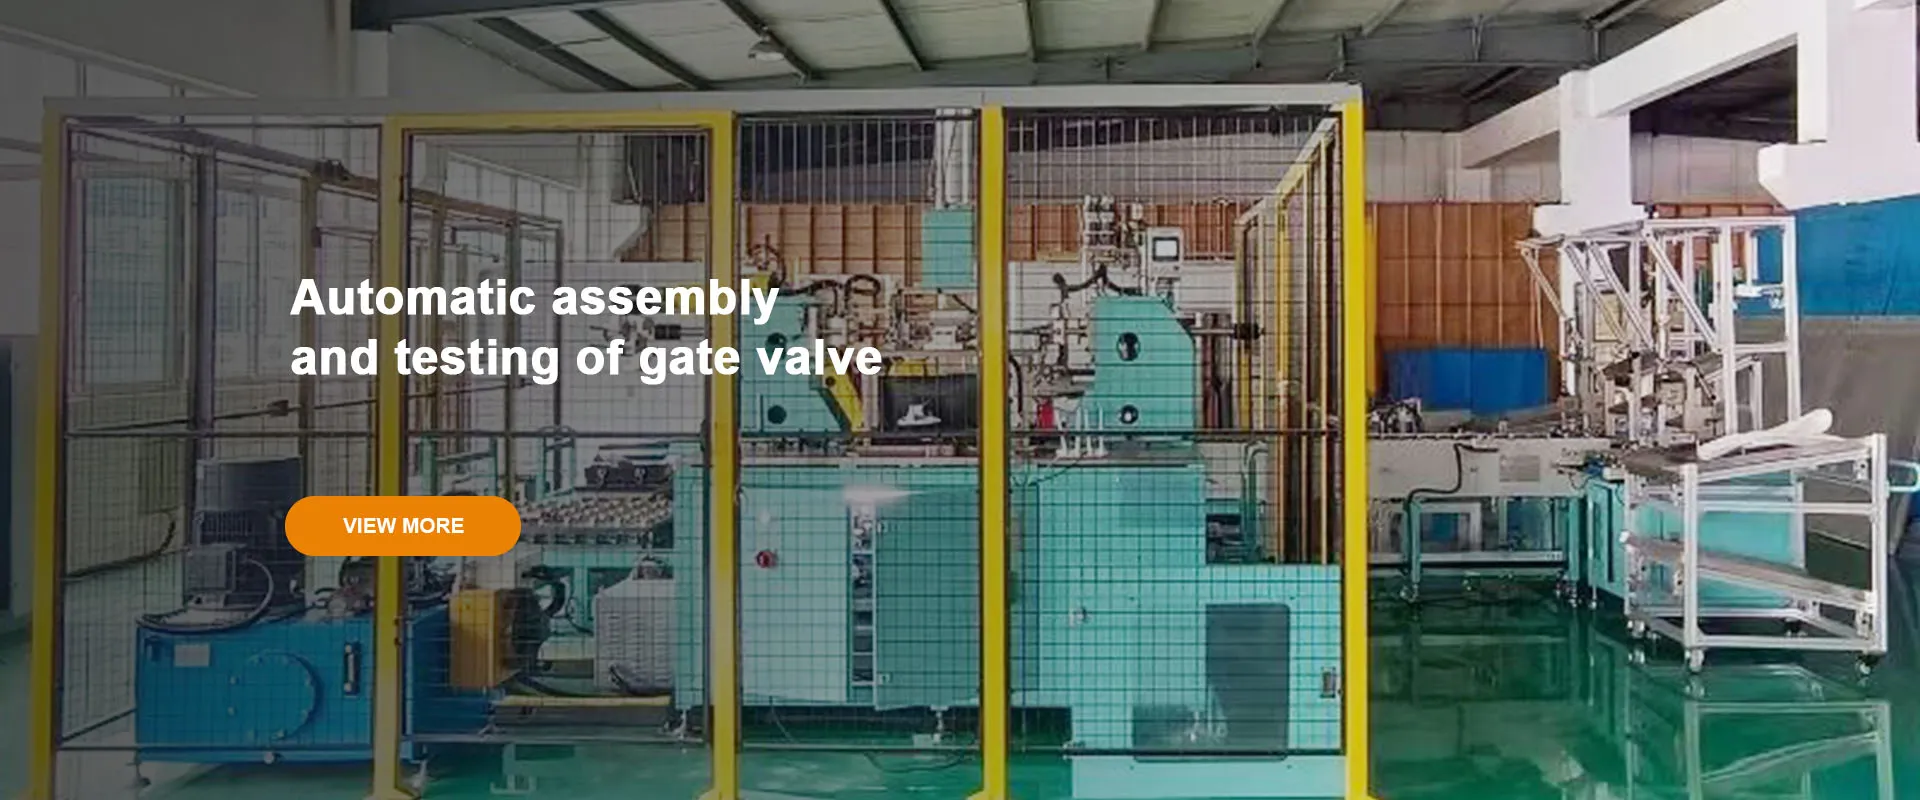 China Automated Valve Assembly And Testing Machine